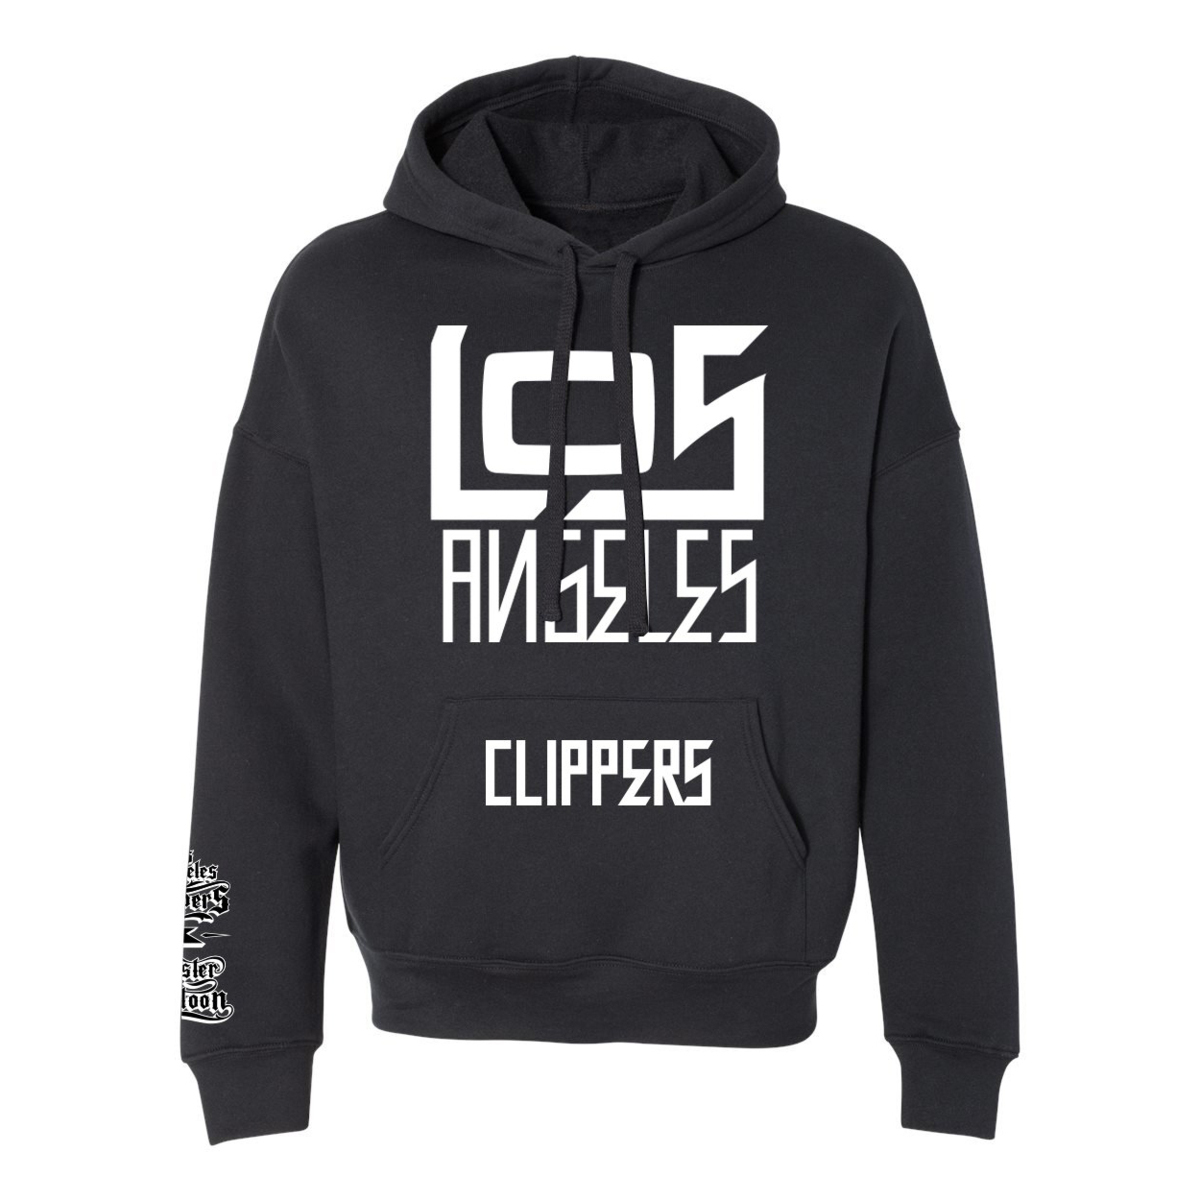 MISTER CARTOON LA CLIPPERS STACKED LOS ANGELES HOODIE BLACK L ミスターカートゥーン ロサンゼルス クリッパーズ スタックド パーカー